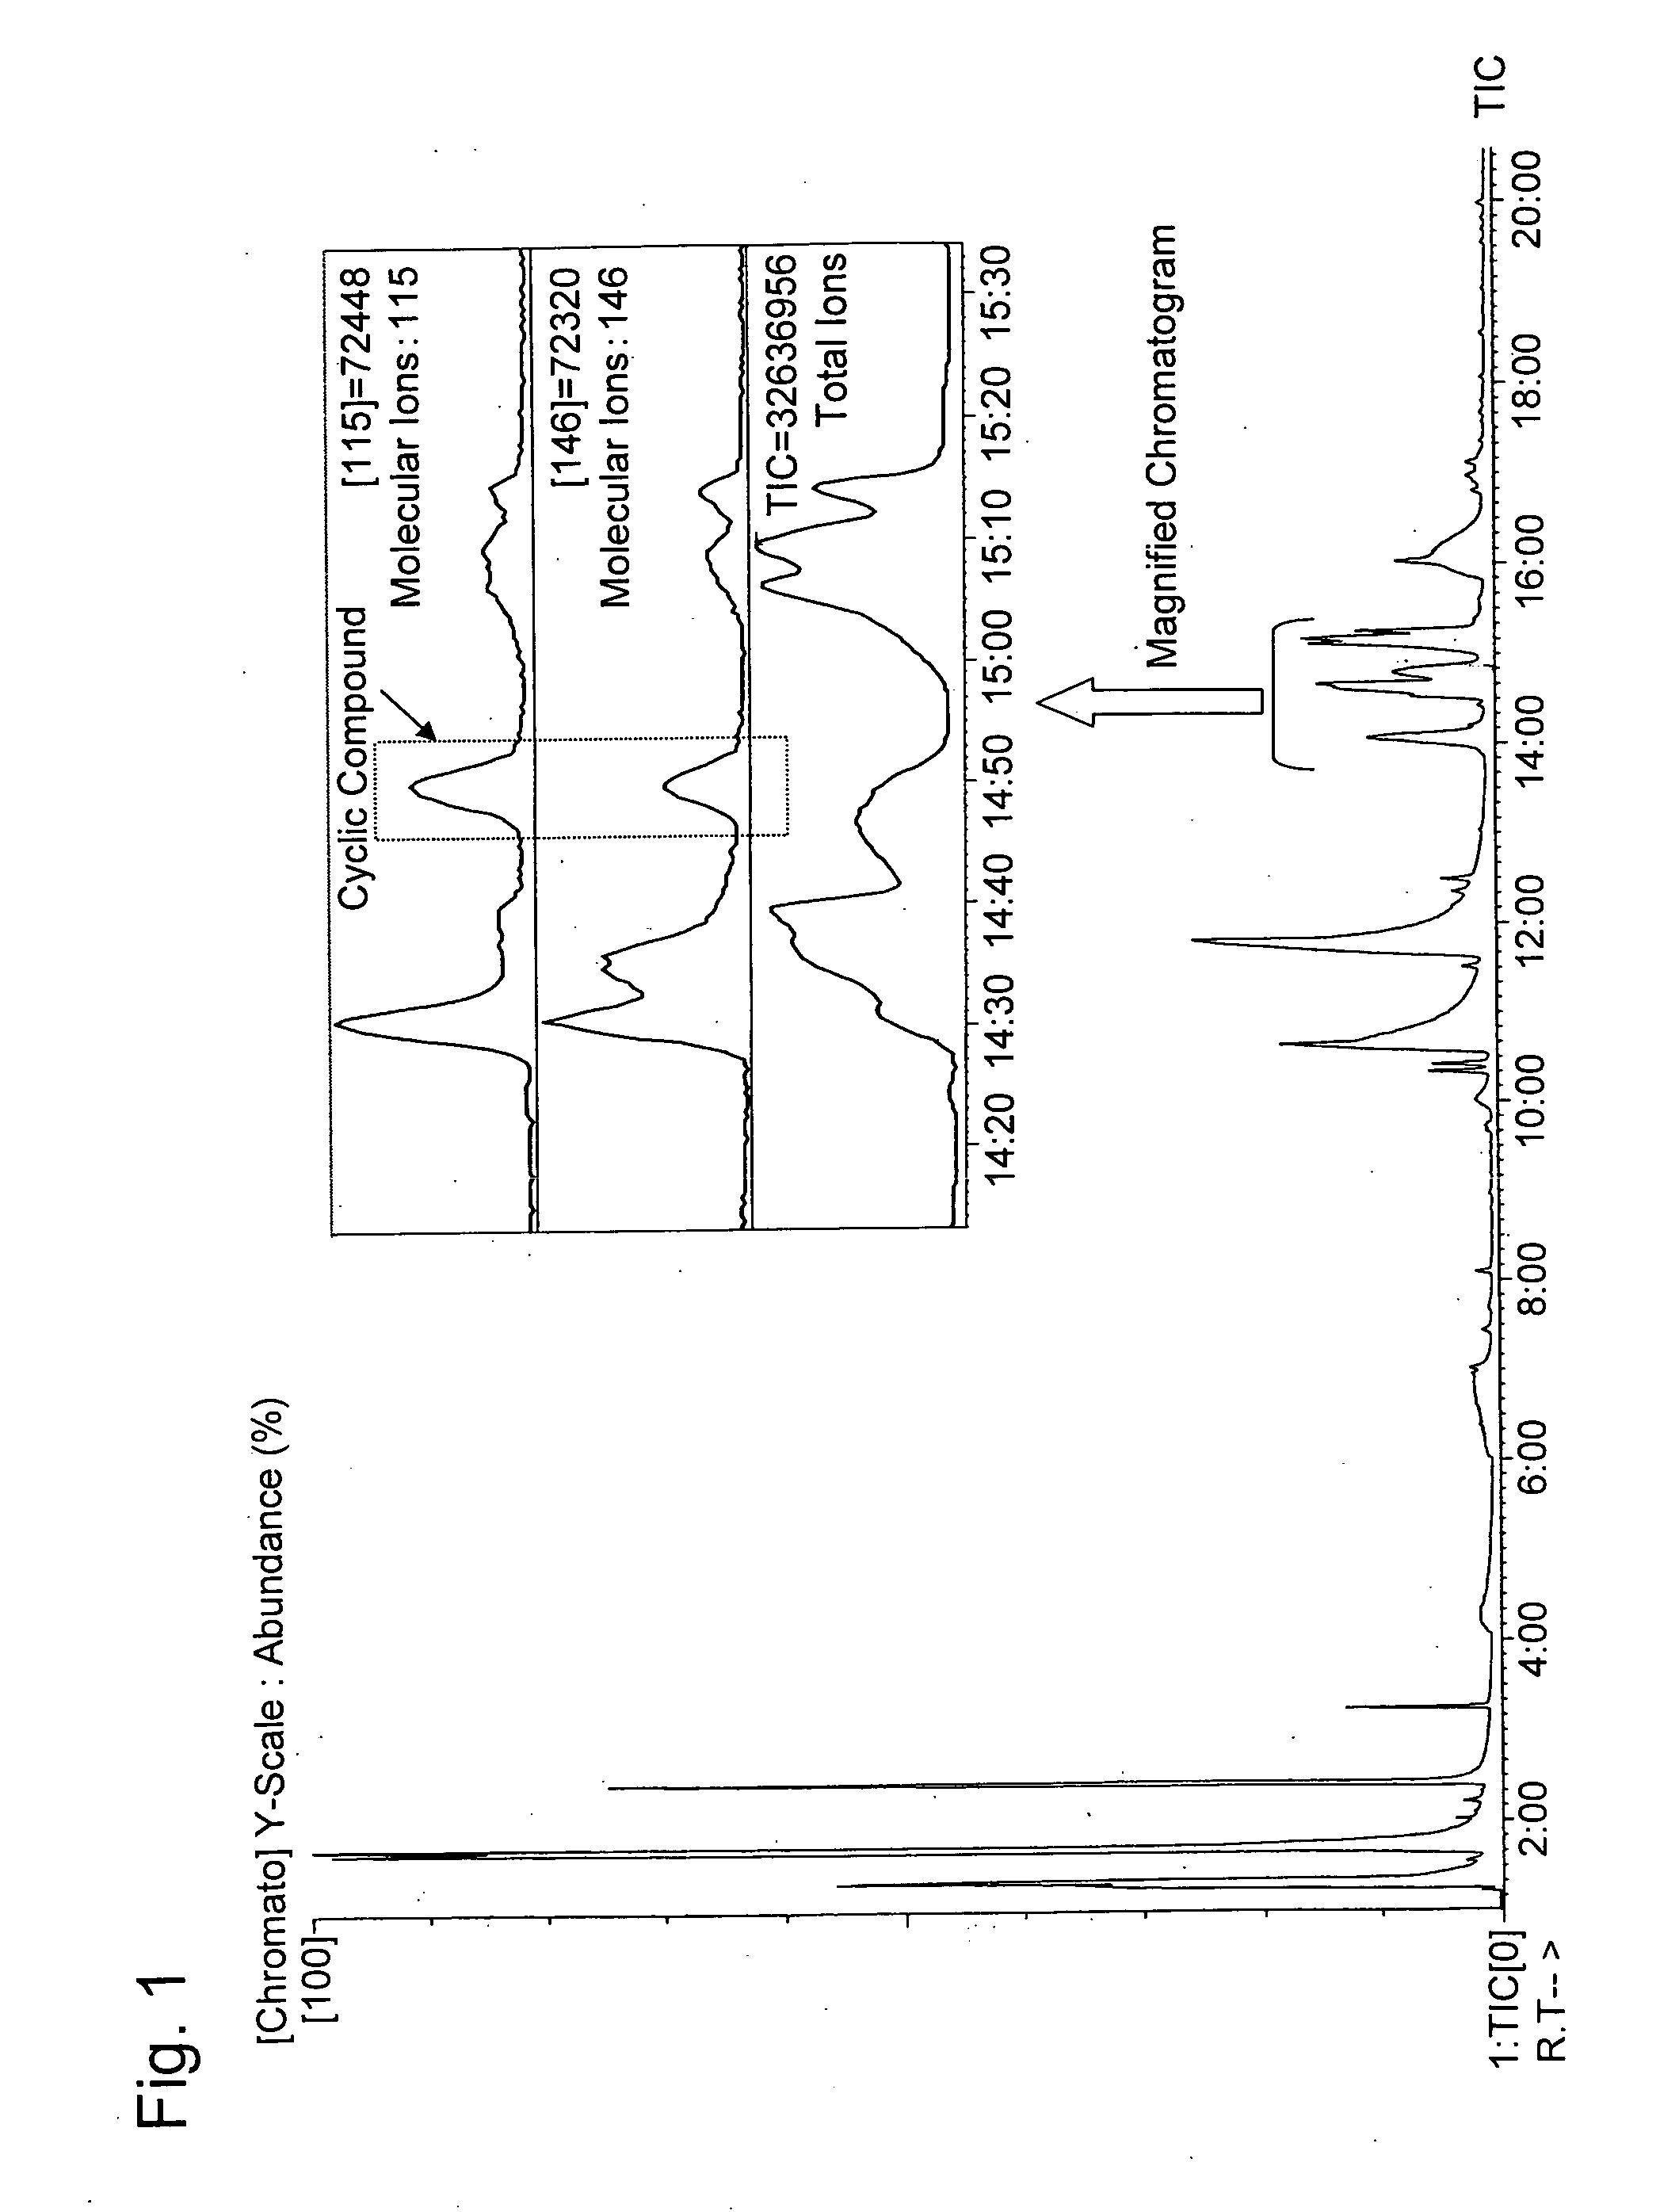 Method for producing lactic acid